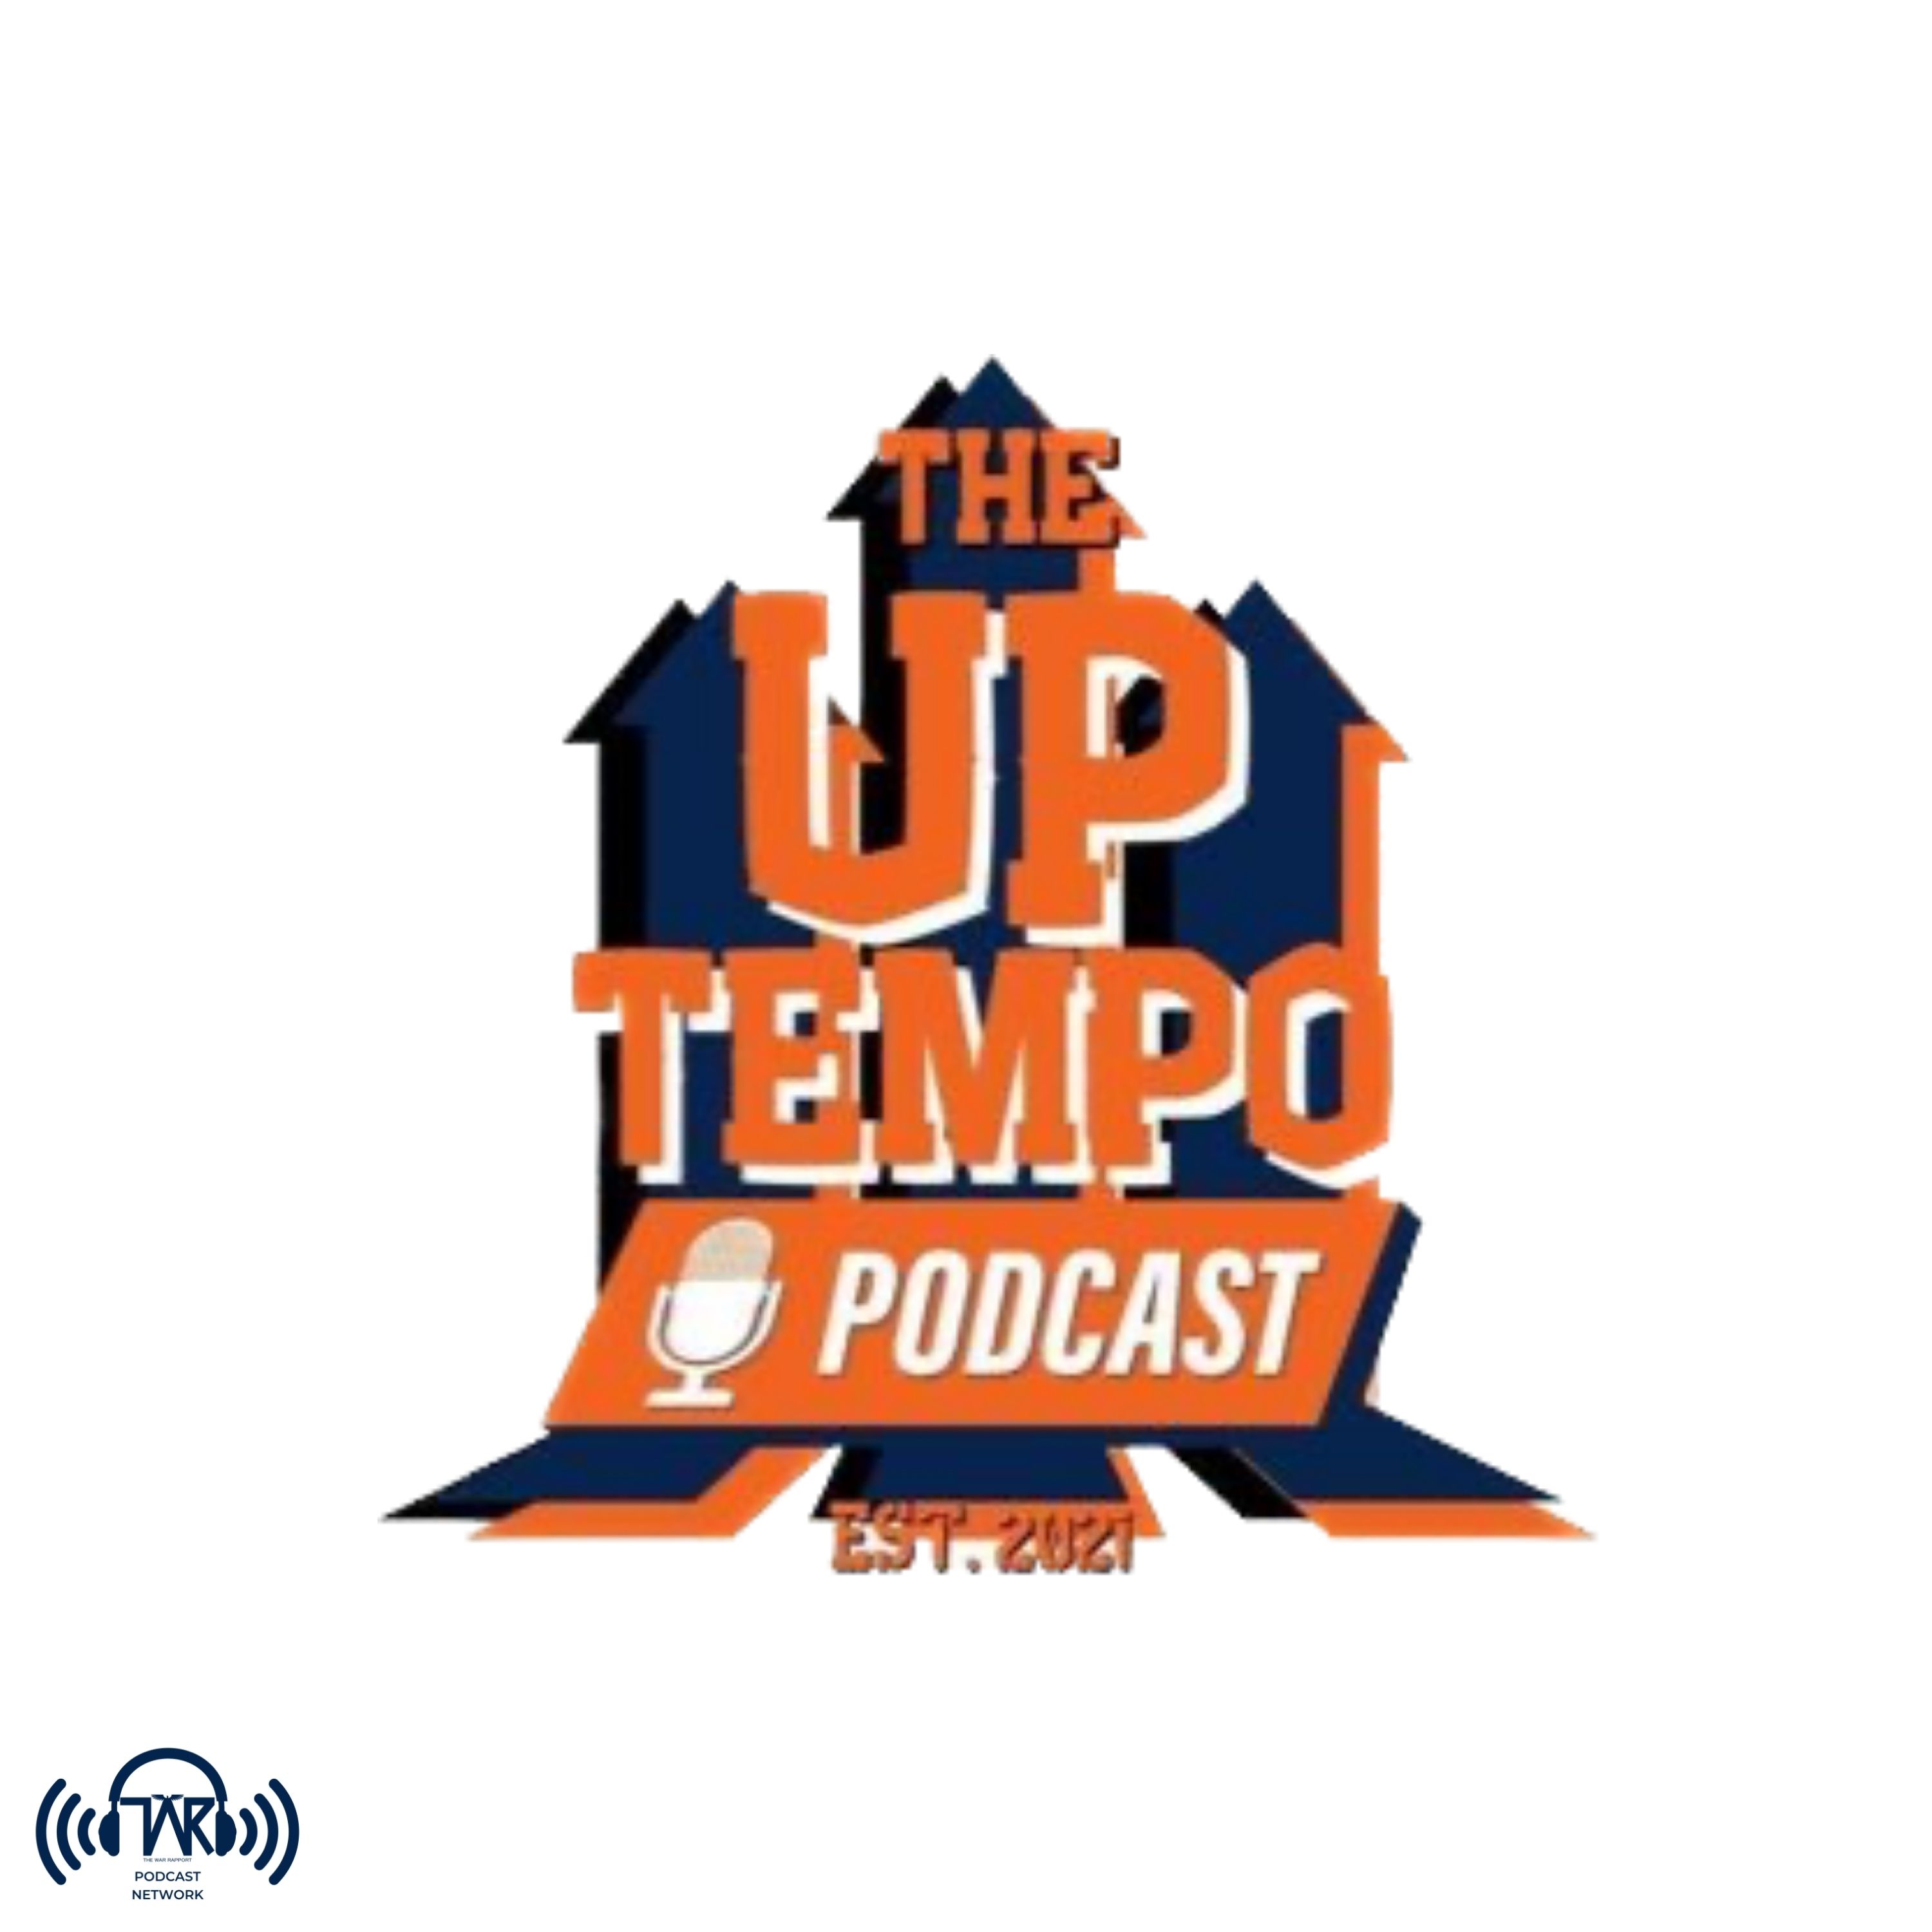 The Up Tempo podcast